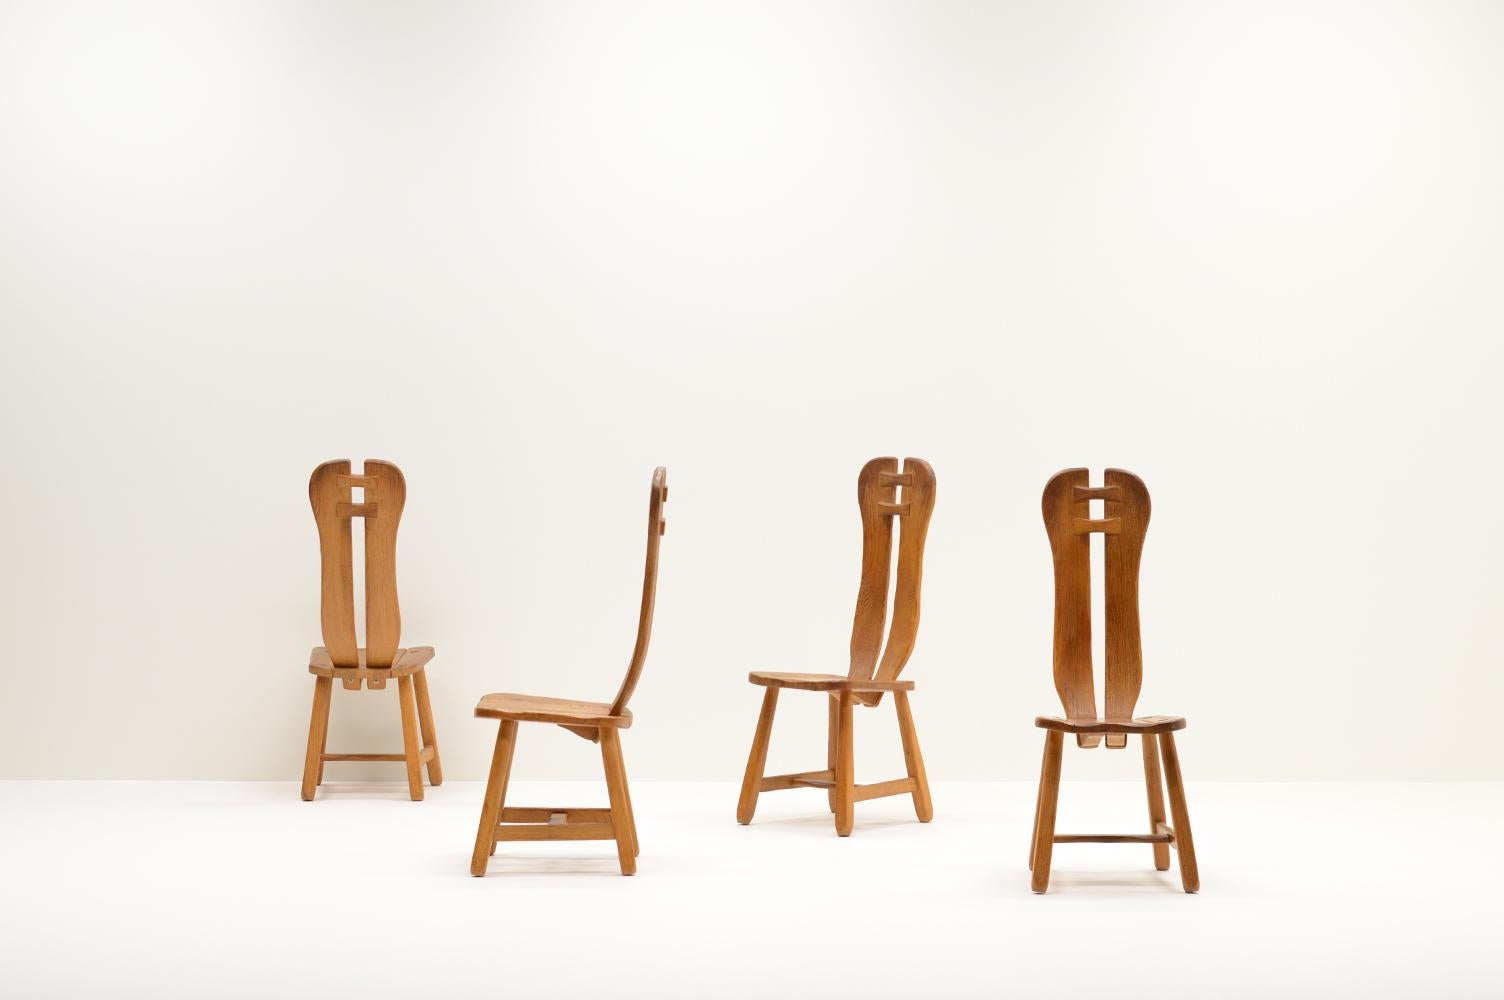 Set of 4 brutalist oak dining chairs made by Kunstmeubelen de Puydt, Belgium, 1970s. The chairs are made from solid oak. In good vintage condition. Price is for the set of 4. 

Request a quote for the latest shipping rates.